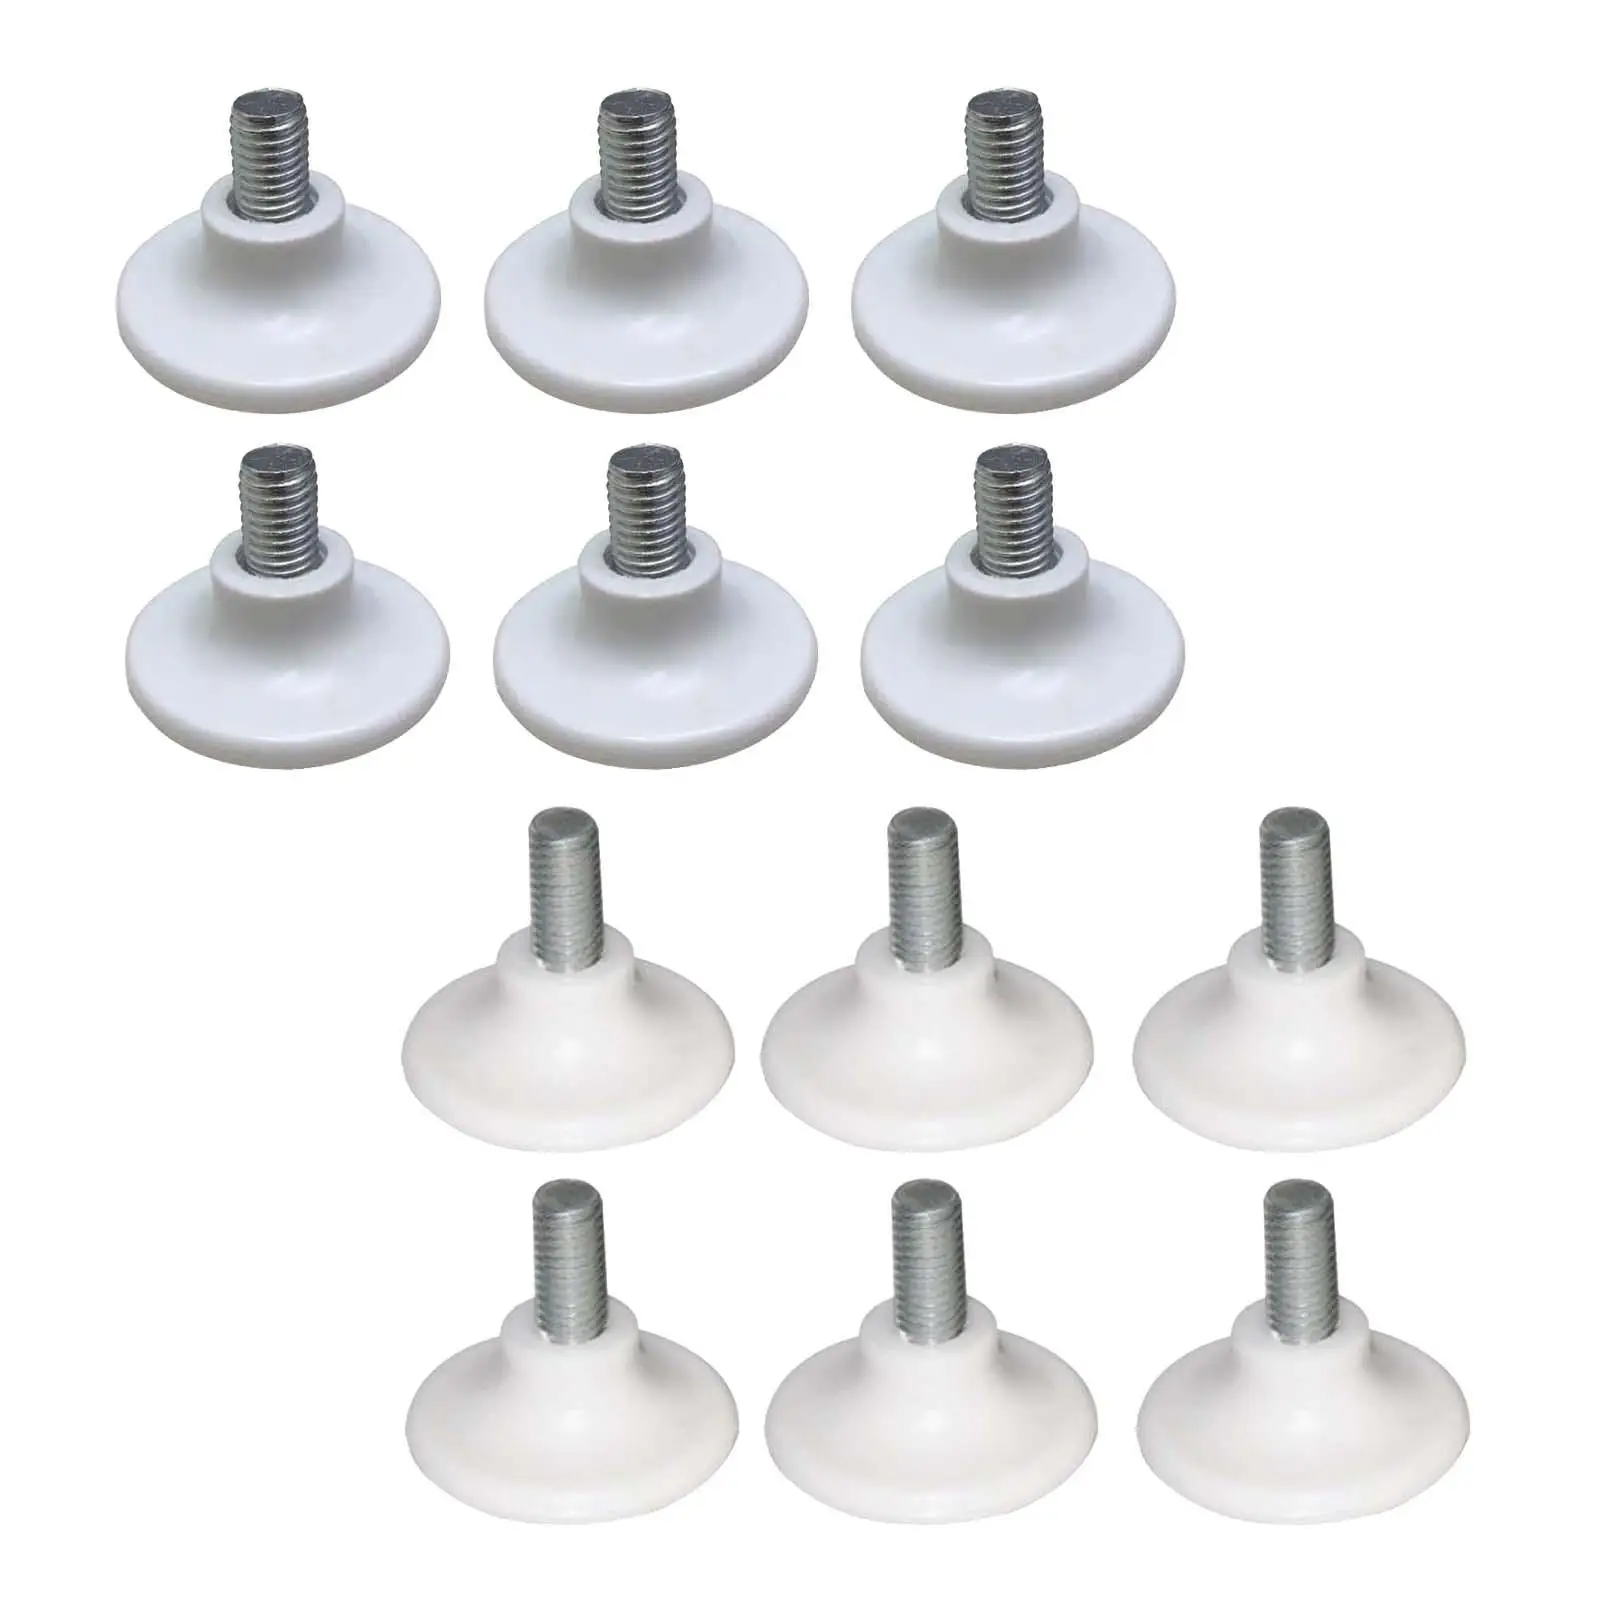 6x Household Furniture Levelers Table Feet Levelers Furniture Glide for Bedroom Kitchen Chair Patio Furniture Cabinet